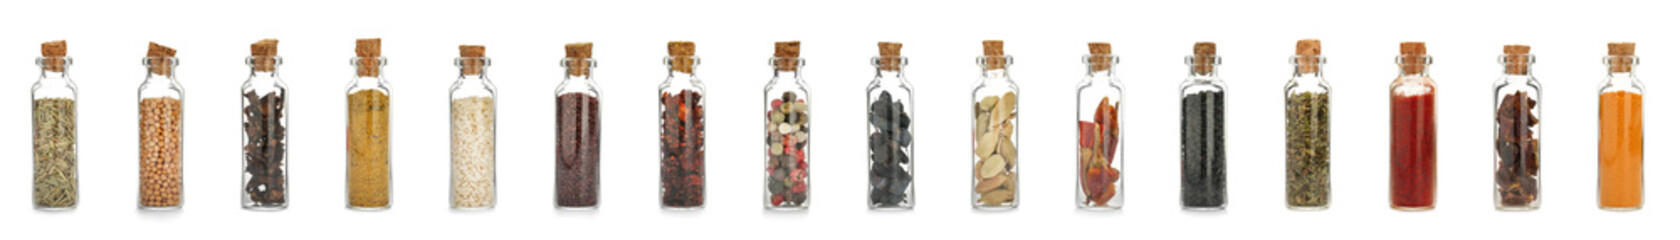 Glass bottles with different spices and herbs on white background. Large collection